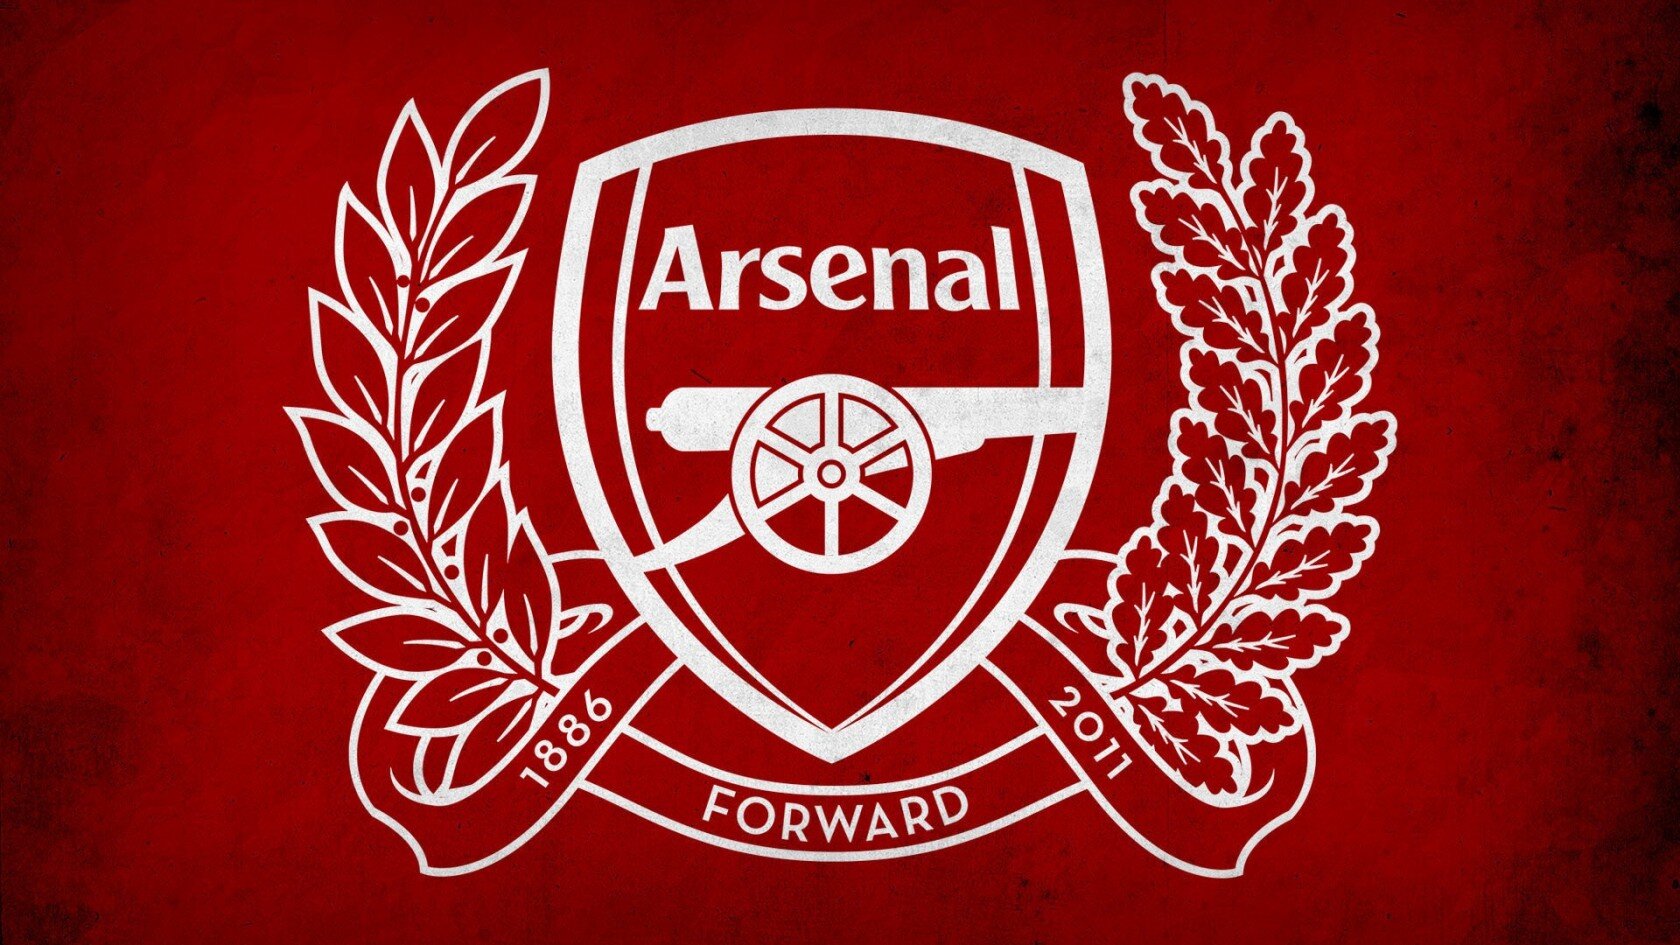 Our new account is @avlarse. Follow us there and come to @PetesPiesAVL in Downtown Asheville for all Arsenal games!